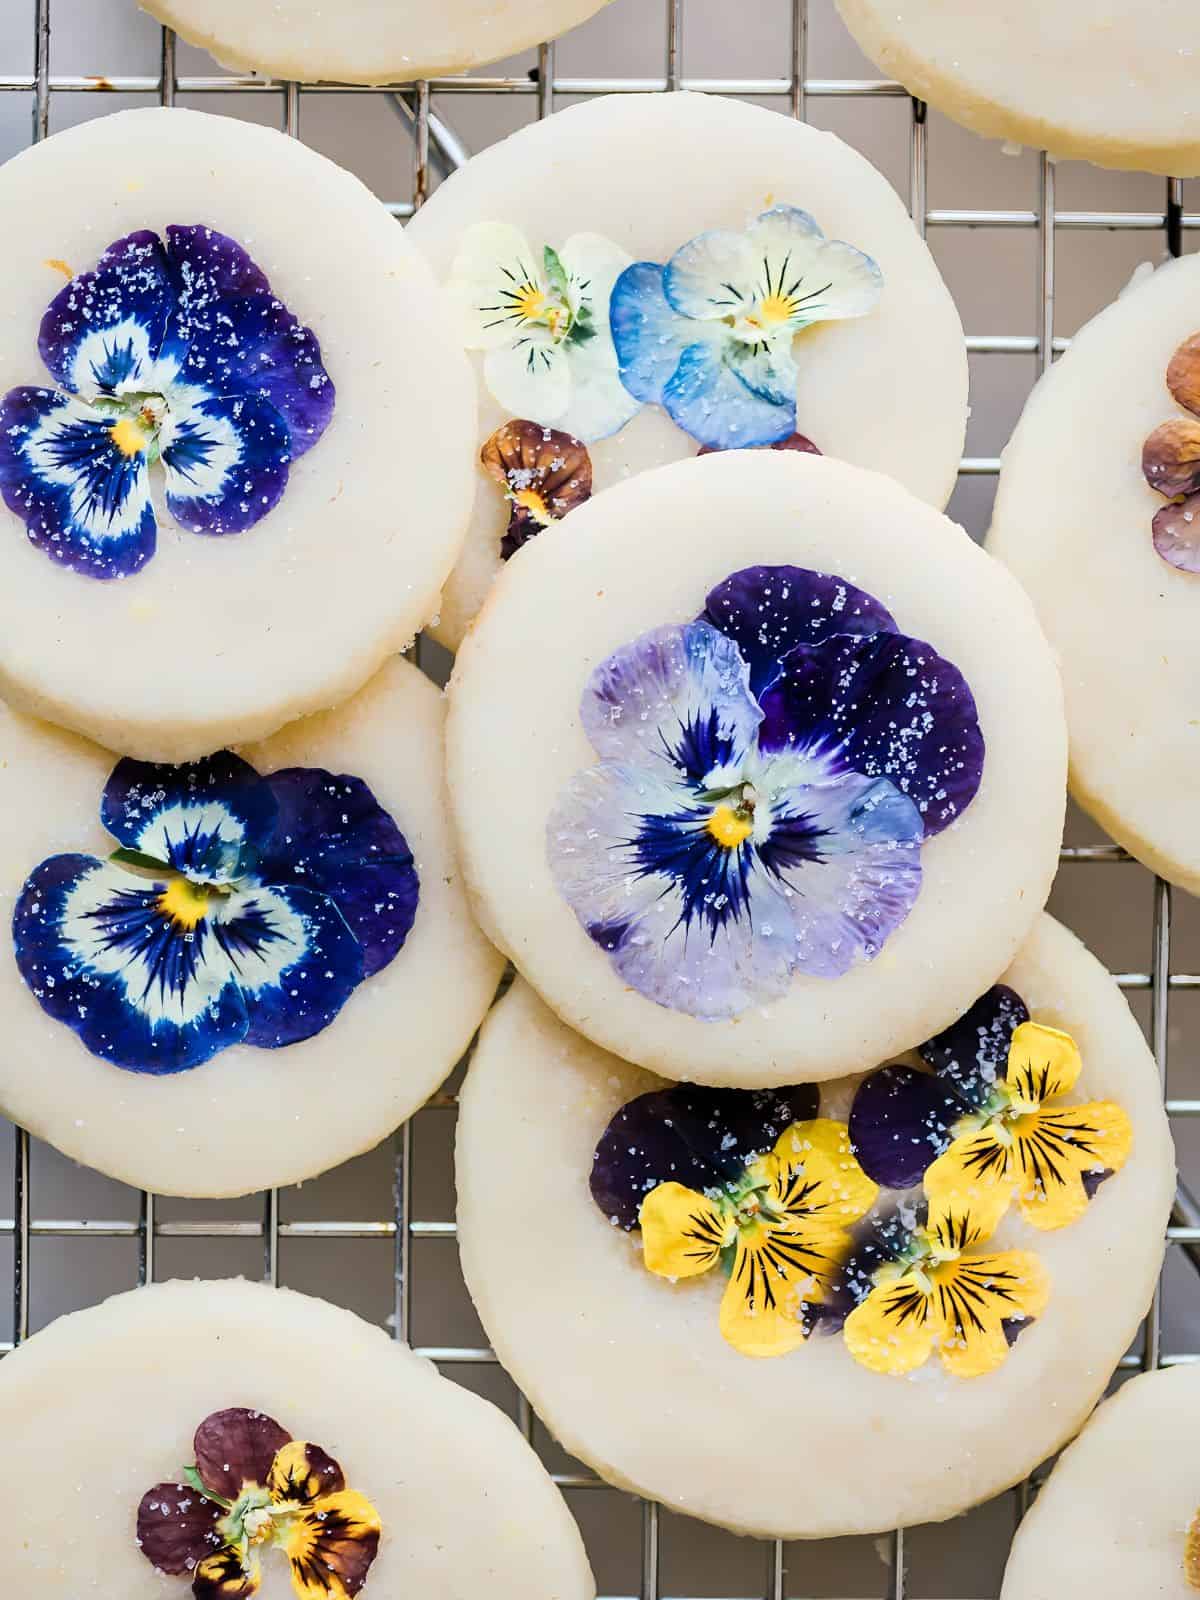 Shortbread cookies with flowers on top.